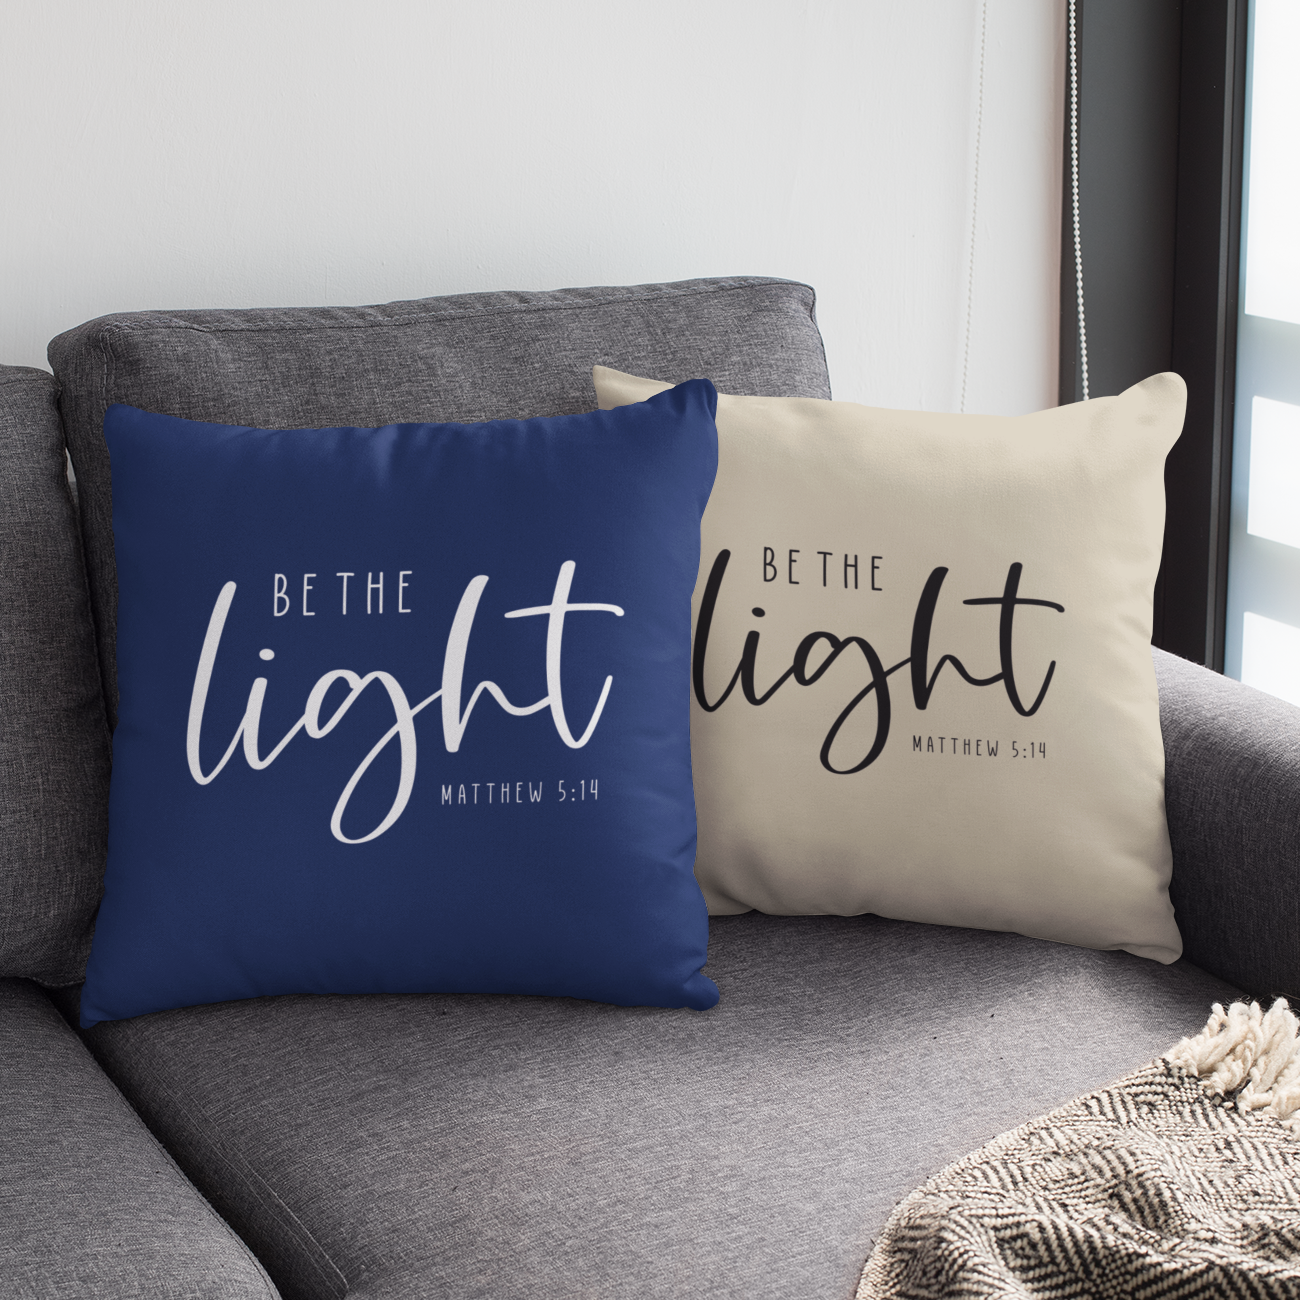 Be The Light Square Throw Pillow